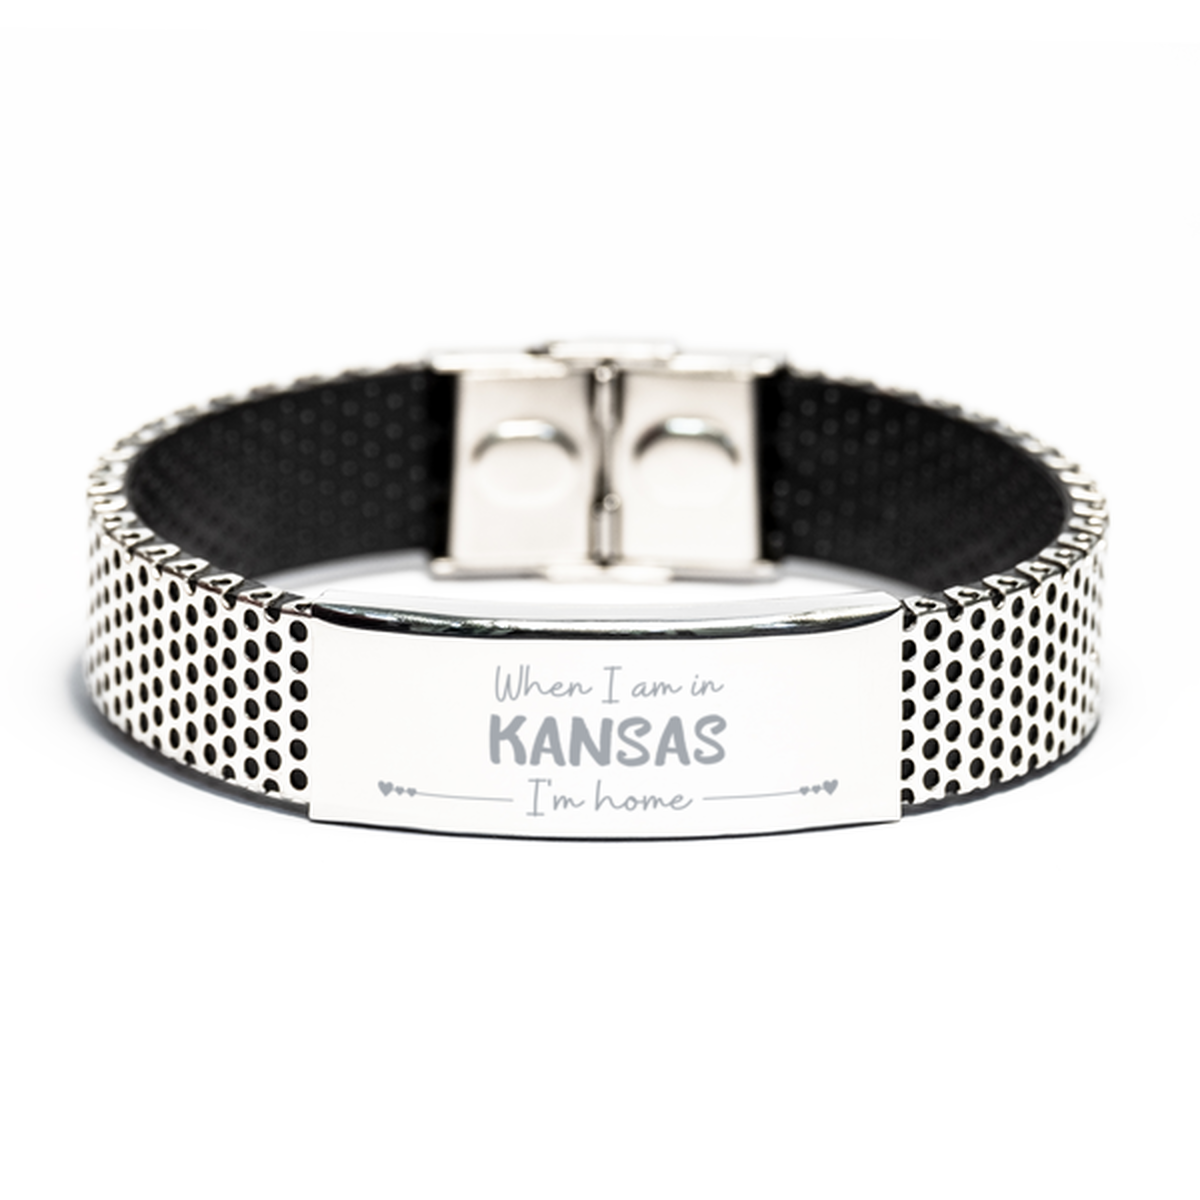 When I am in Kansas I'm home Stainless Steel Bracelet, Cheap Gifts For Kansas, State Kansas Birthday Gifts for Friends Coworker